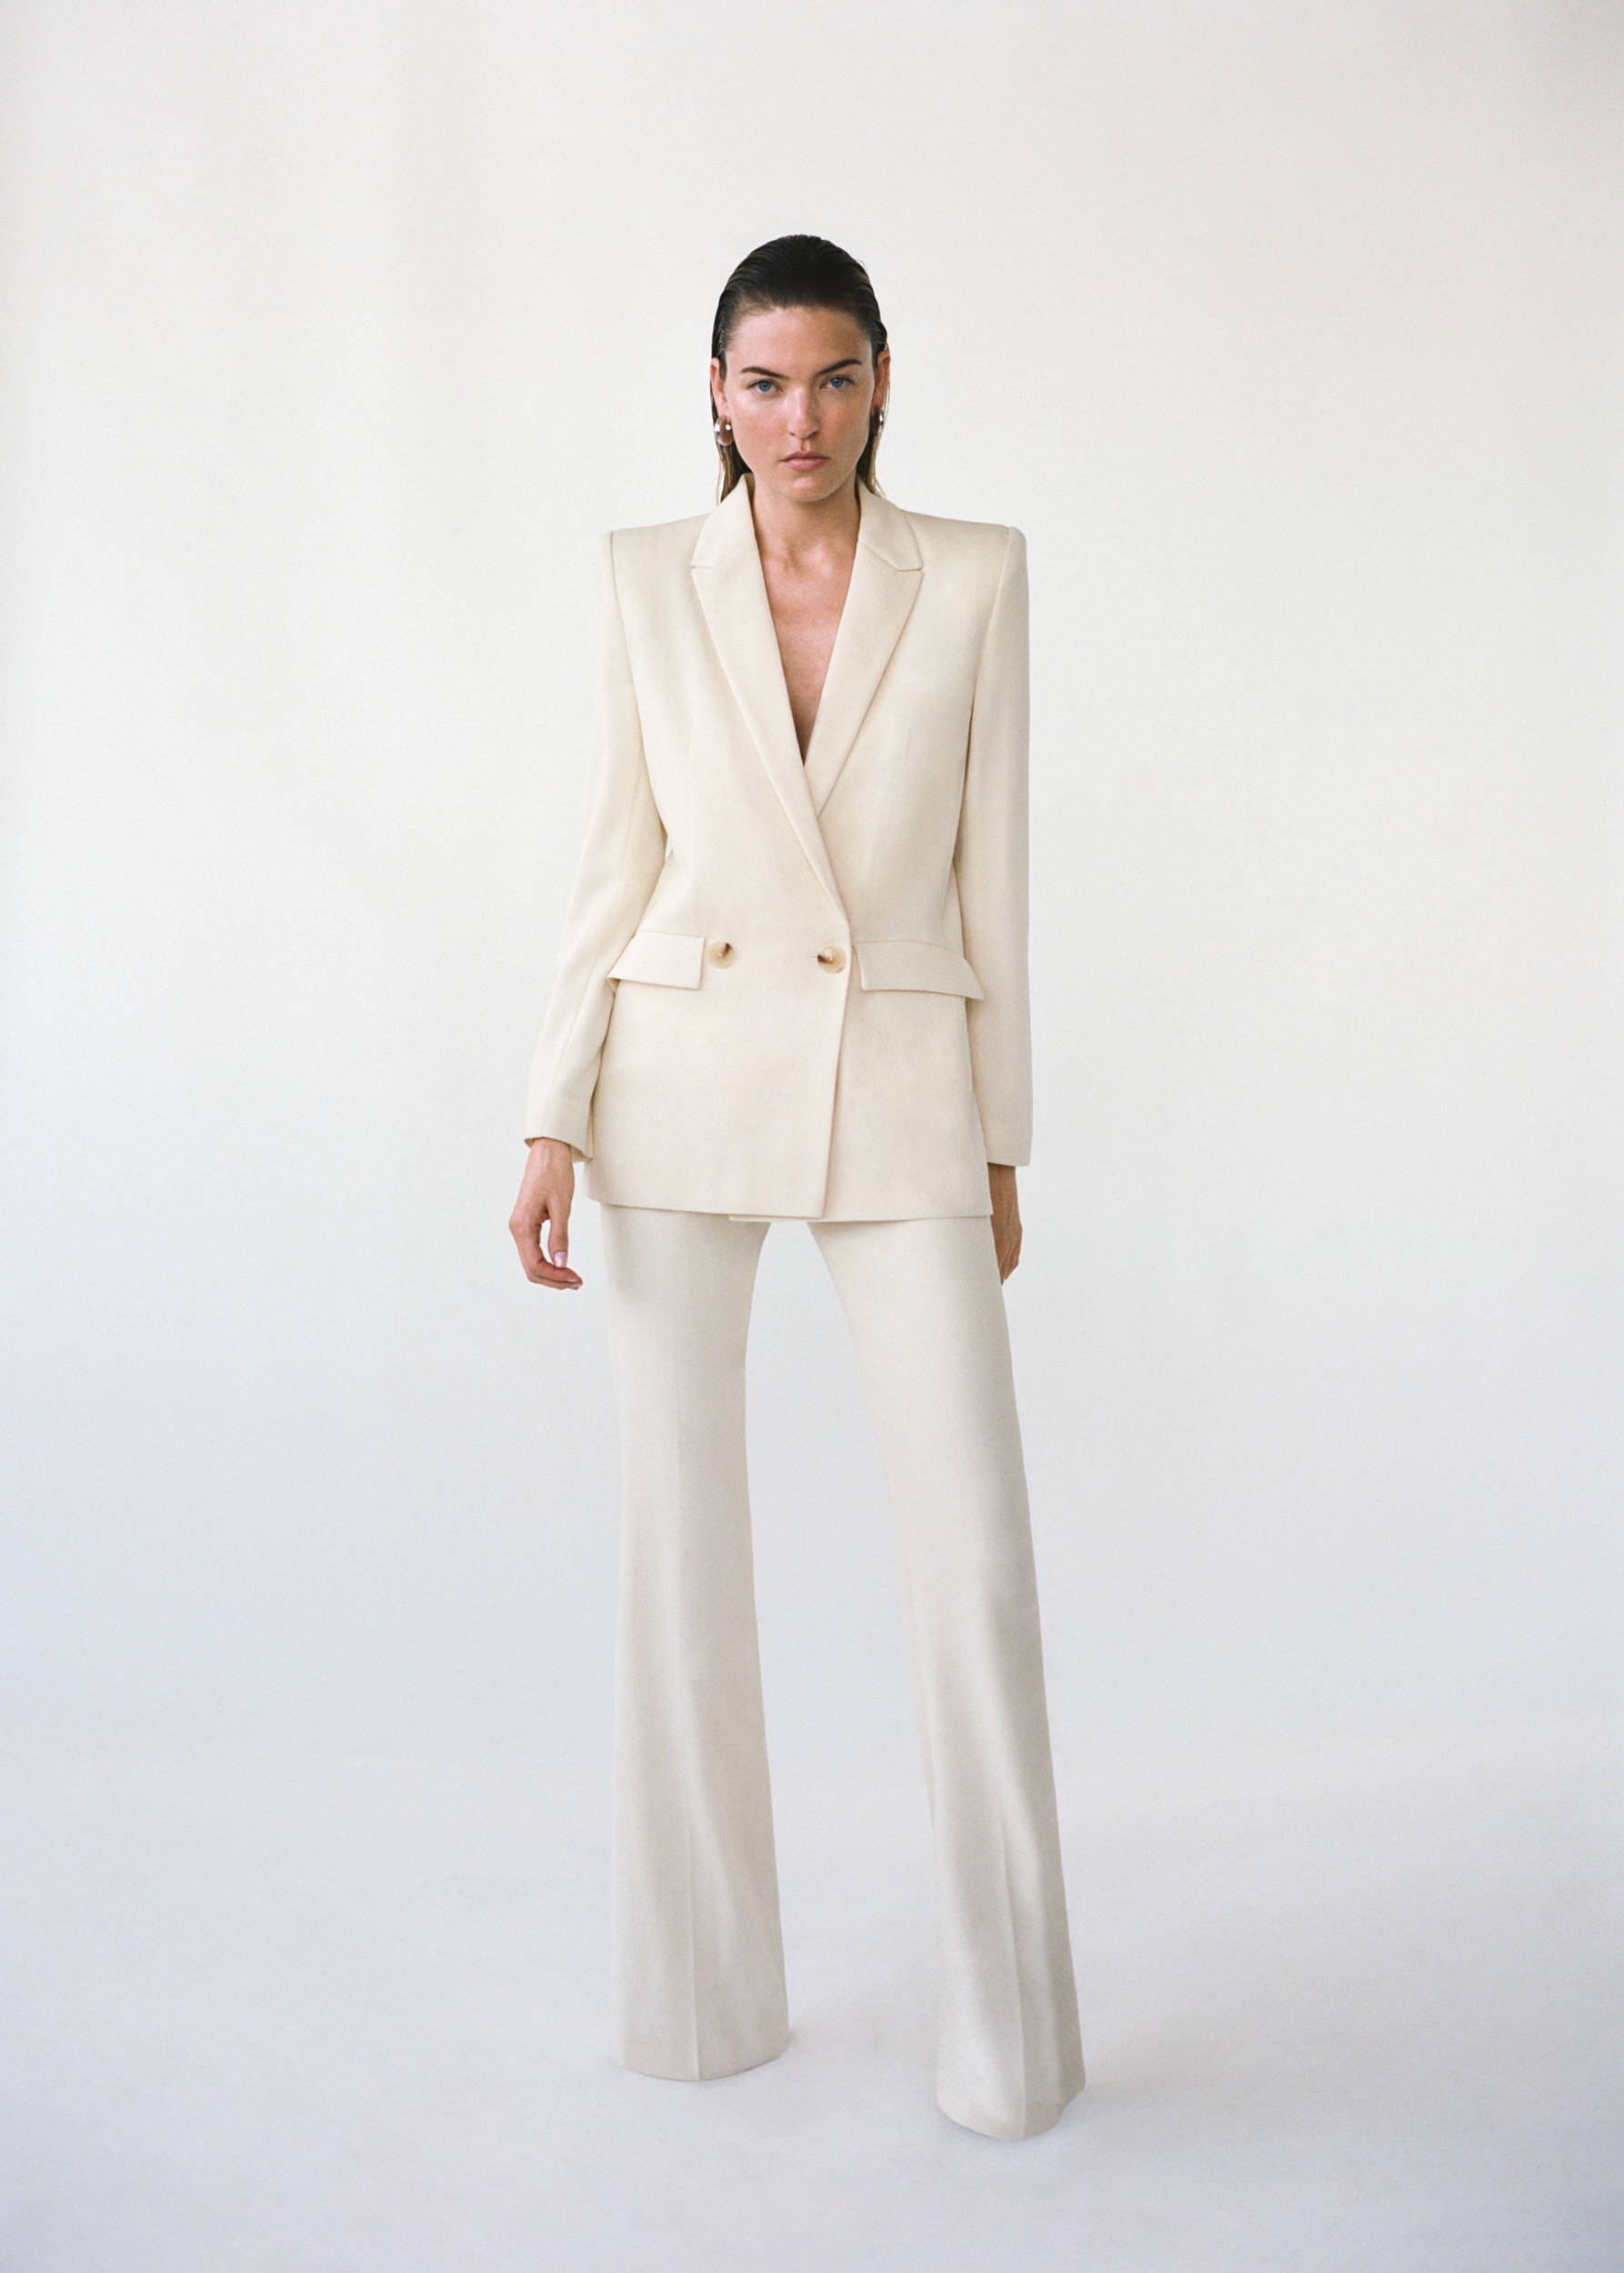 Galvan x Martha Hunt Capsule - Spinal Blazer and tailored trousers in off white